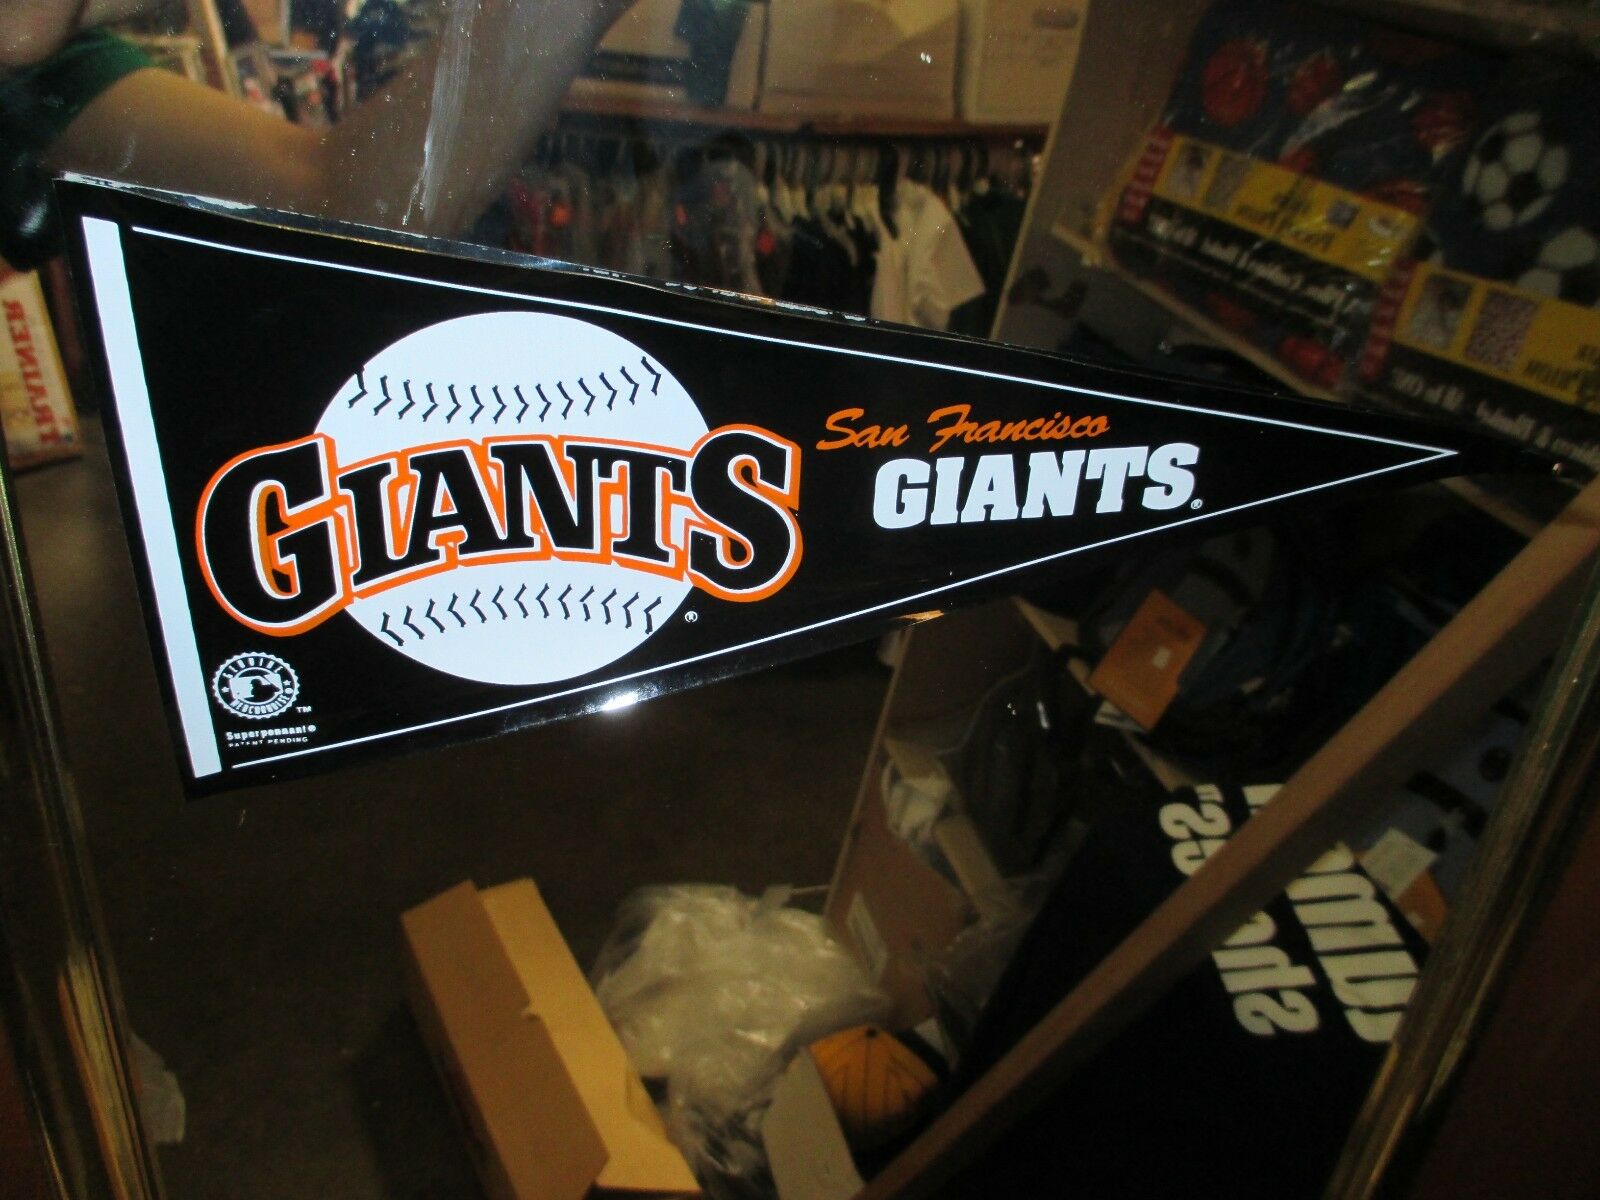 UNIVERSAL HEIGHTS OFFICIALLY LICENSED SANFRANCISCO GIANTS SUPERPENNANT